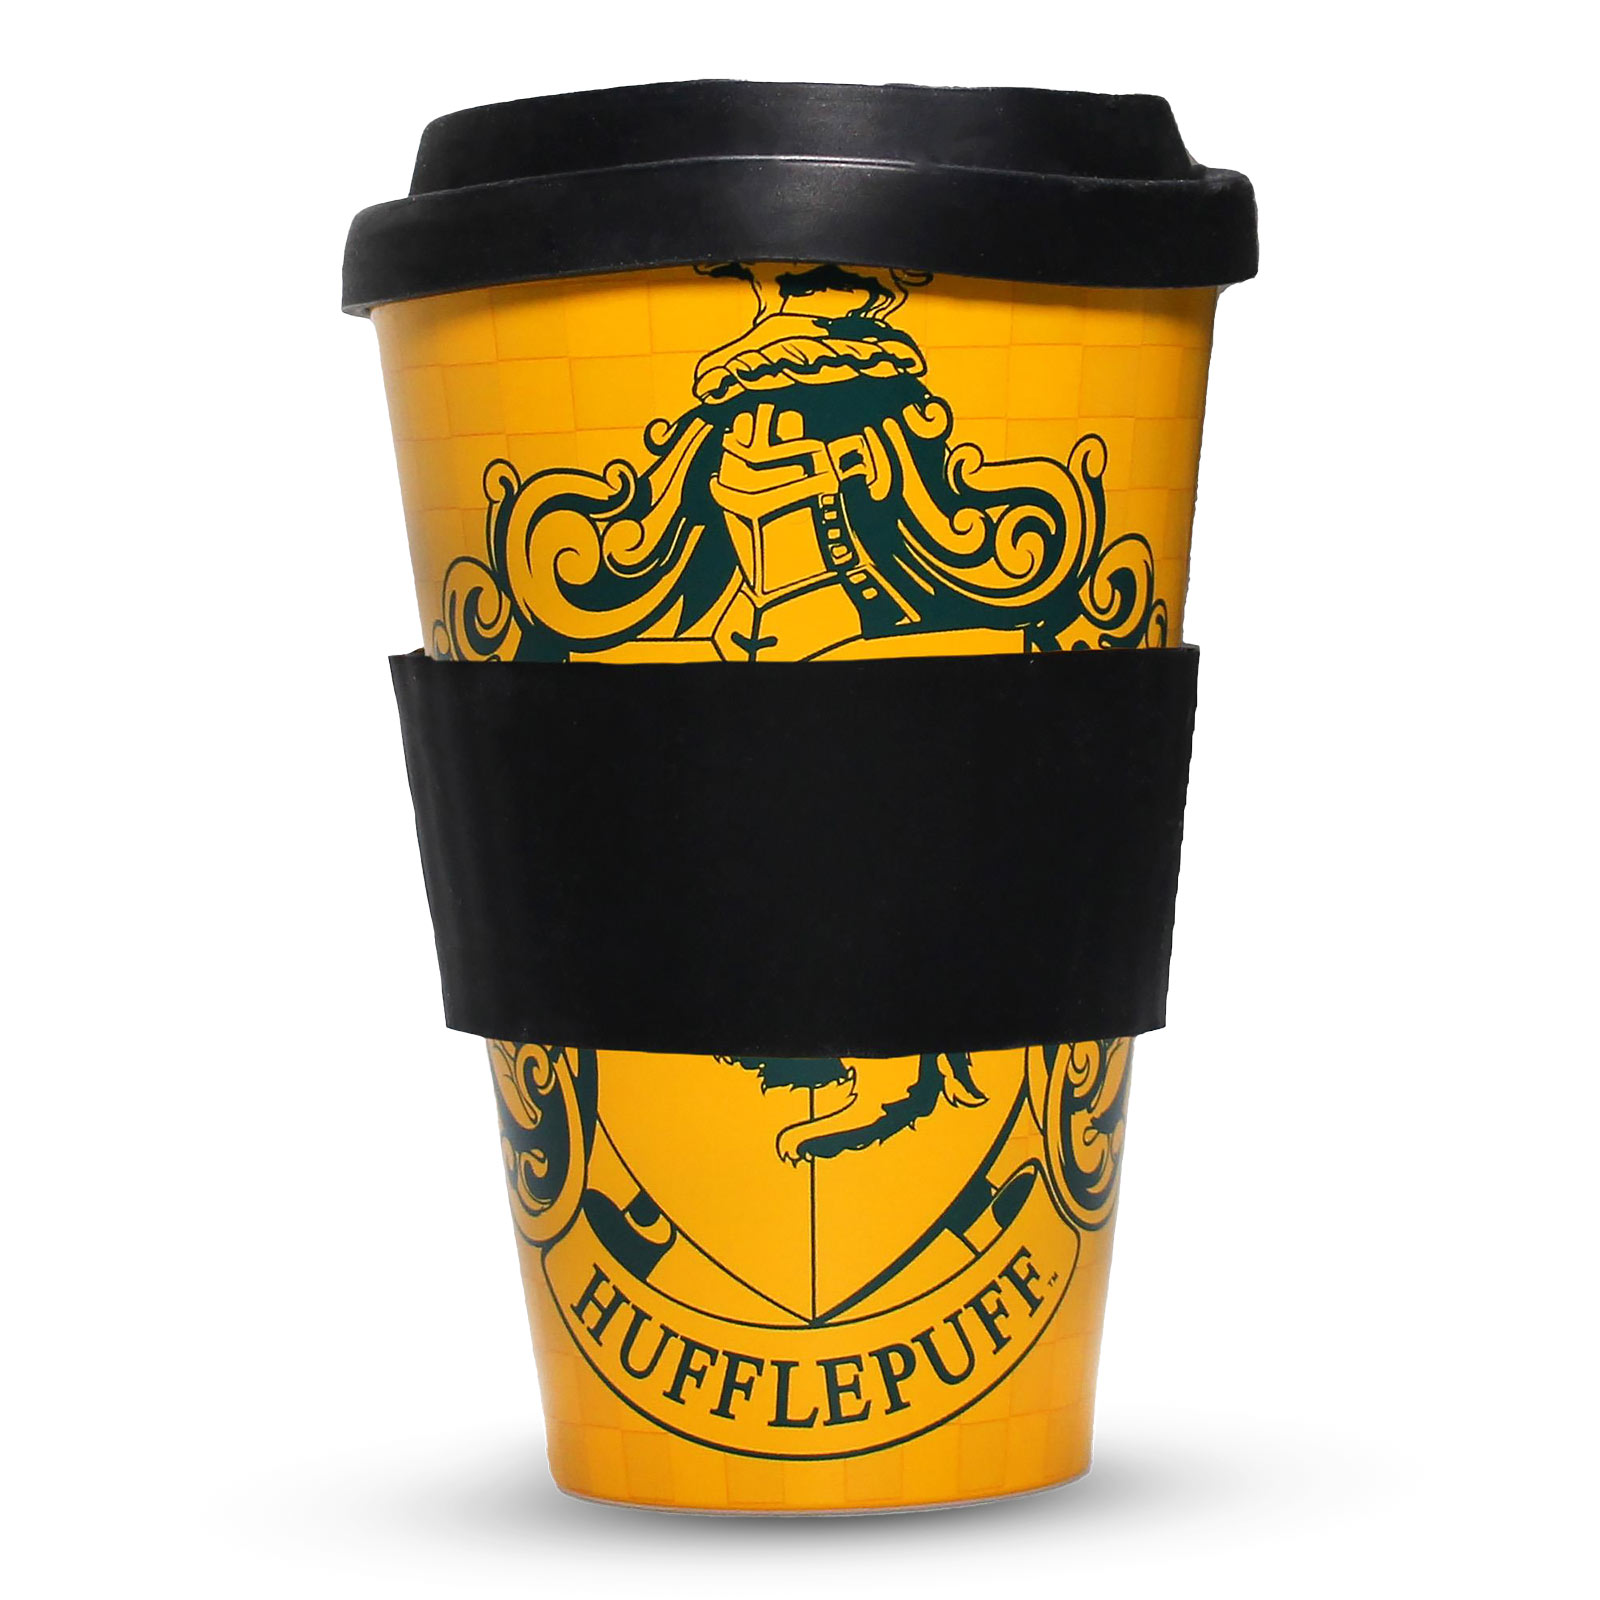 Harry Potter - Proud Hufflepuff To Go Cup